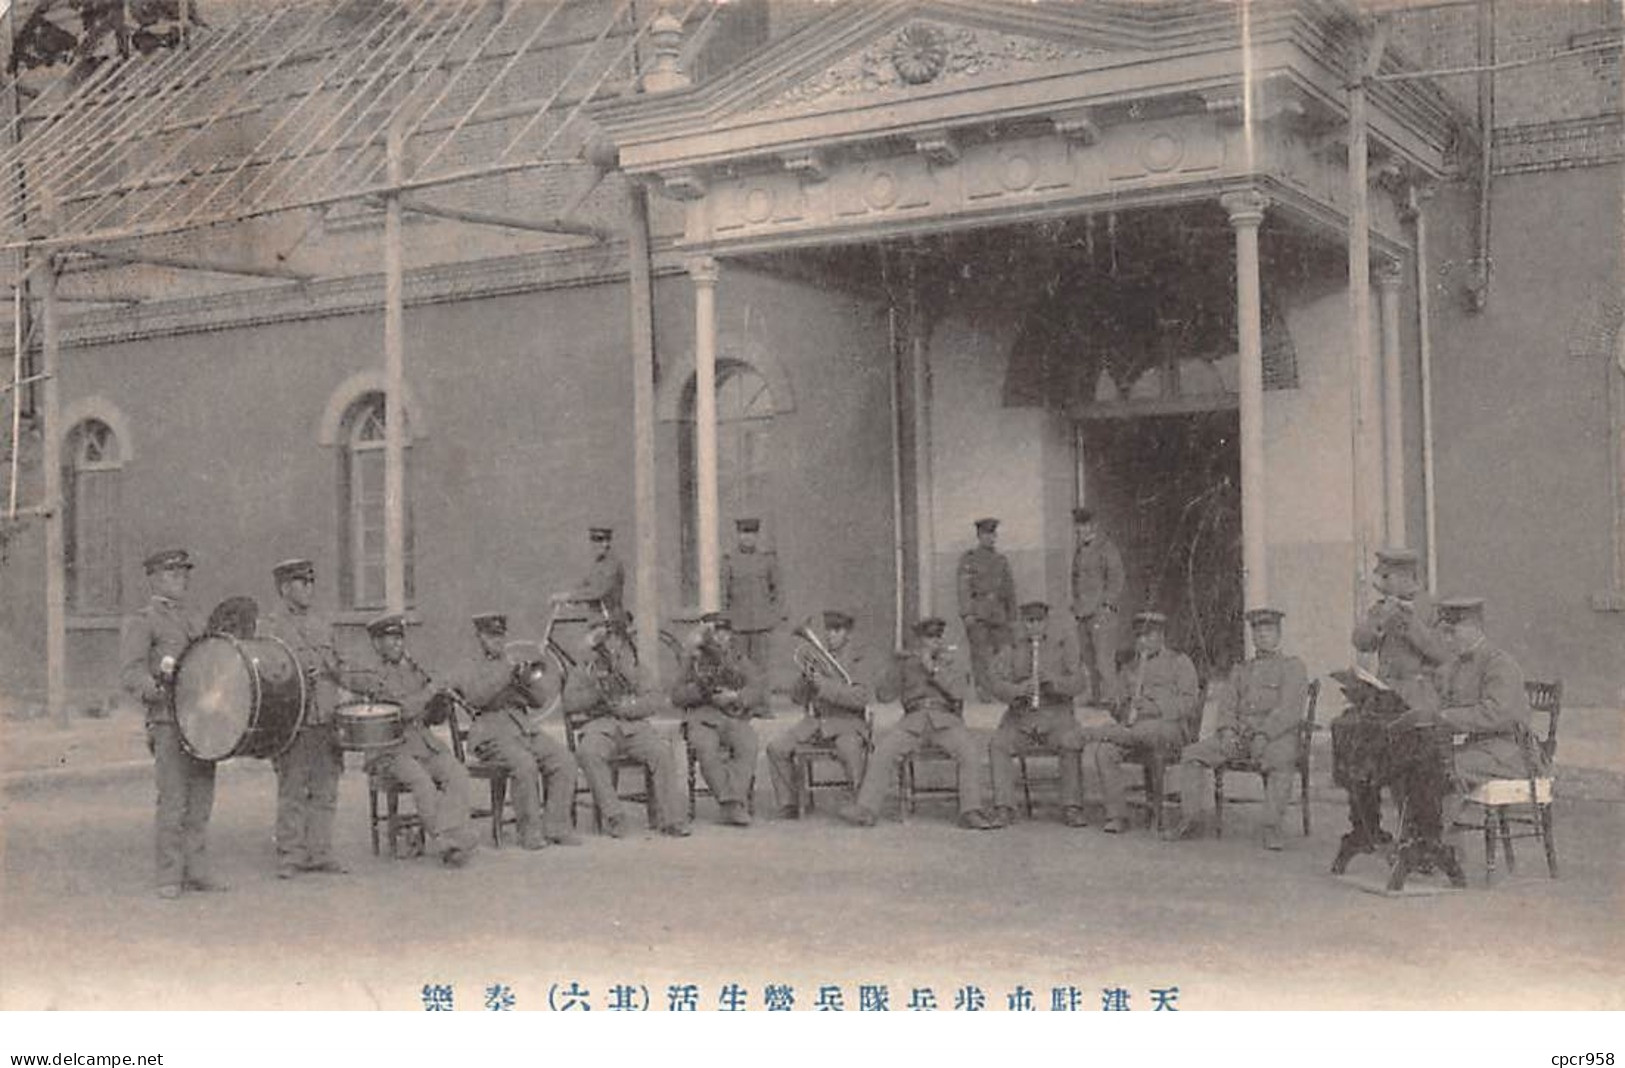 Chine - N°65186 - Fanfare Militaire Chinoise - Chine